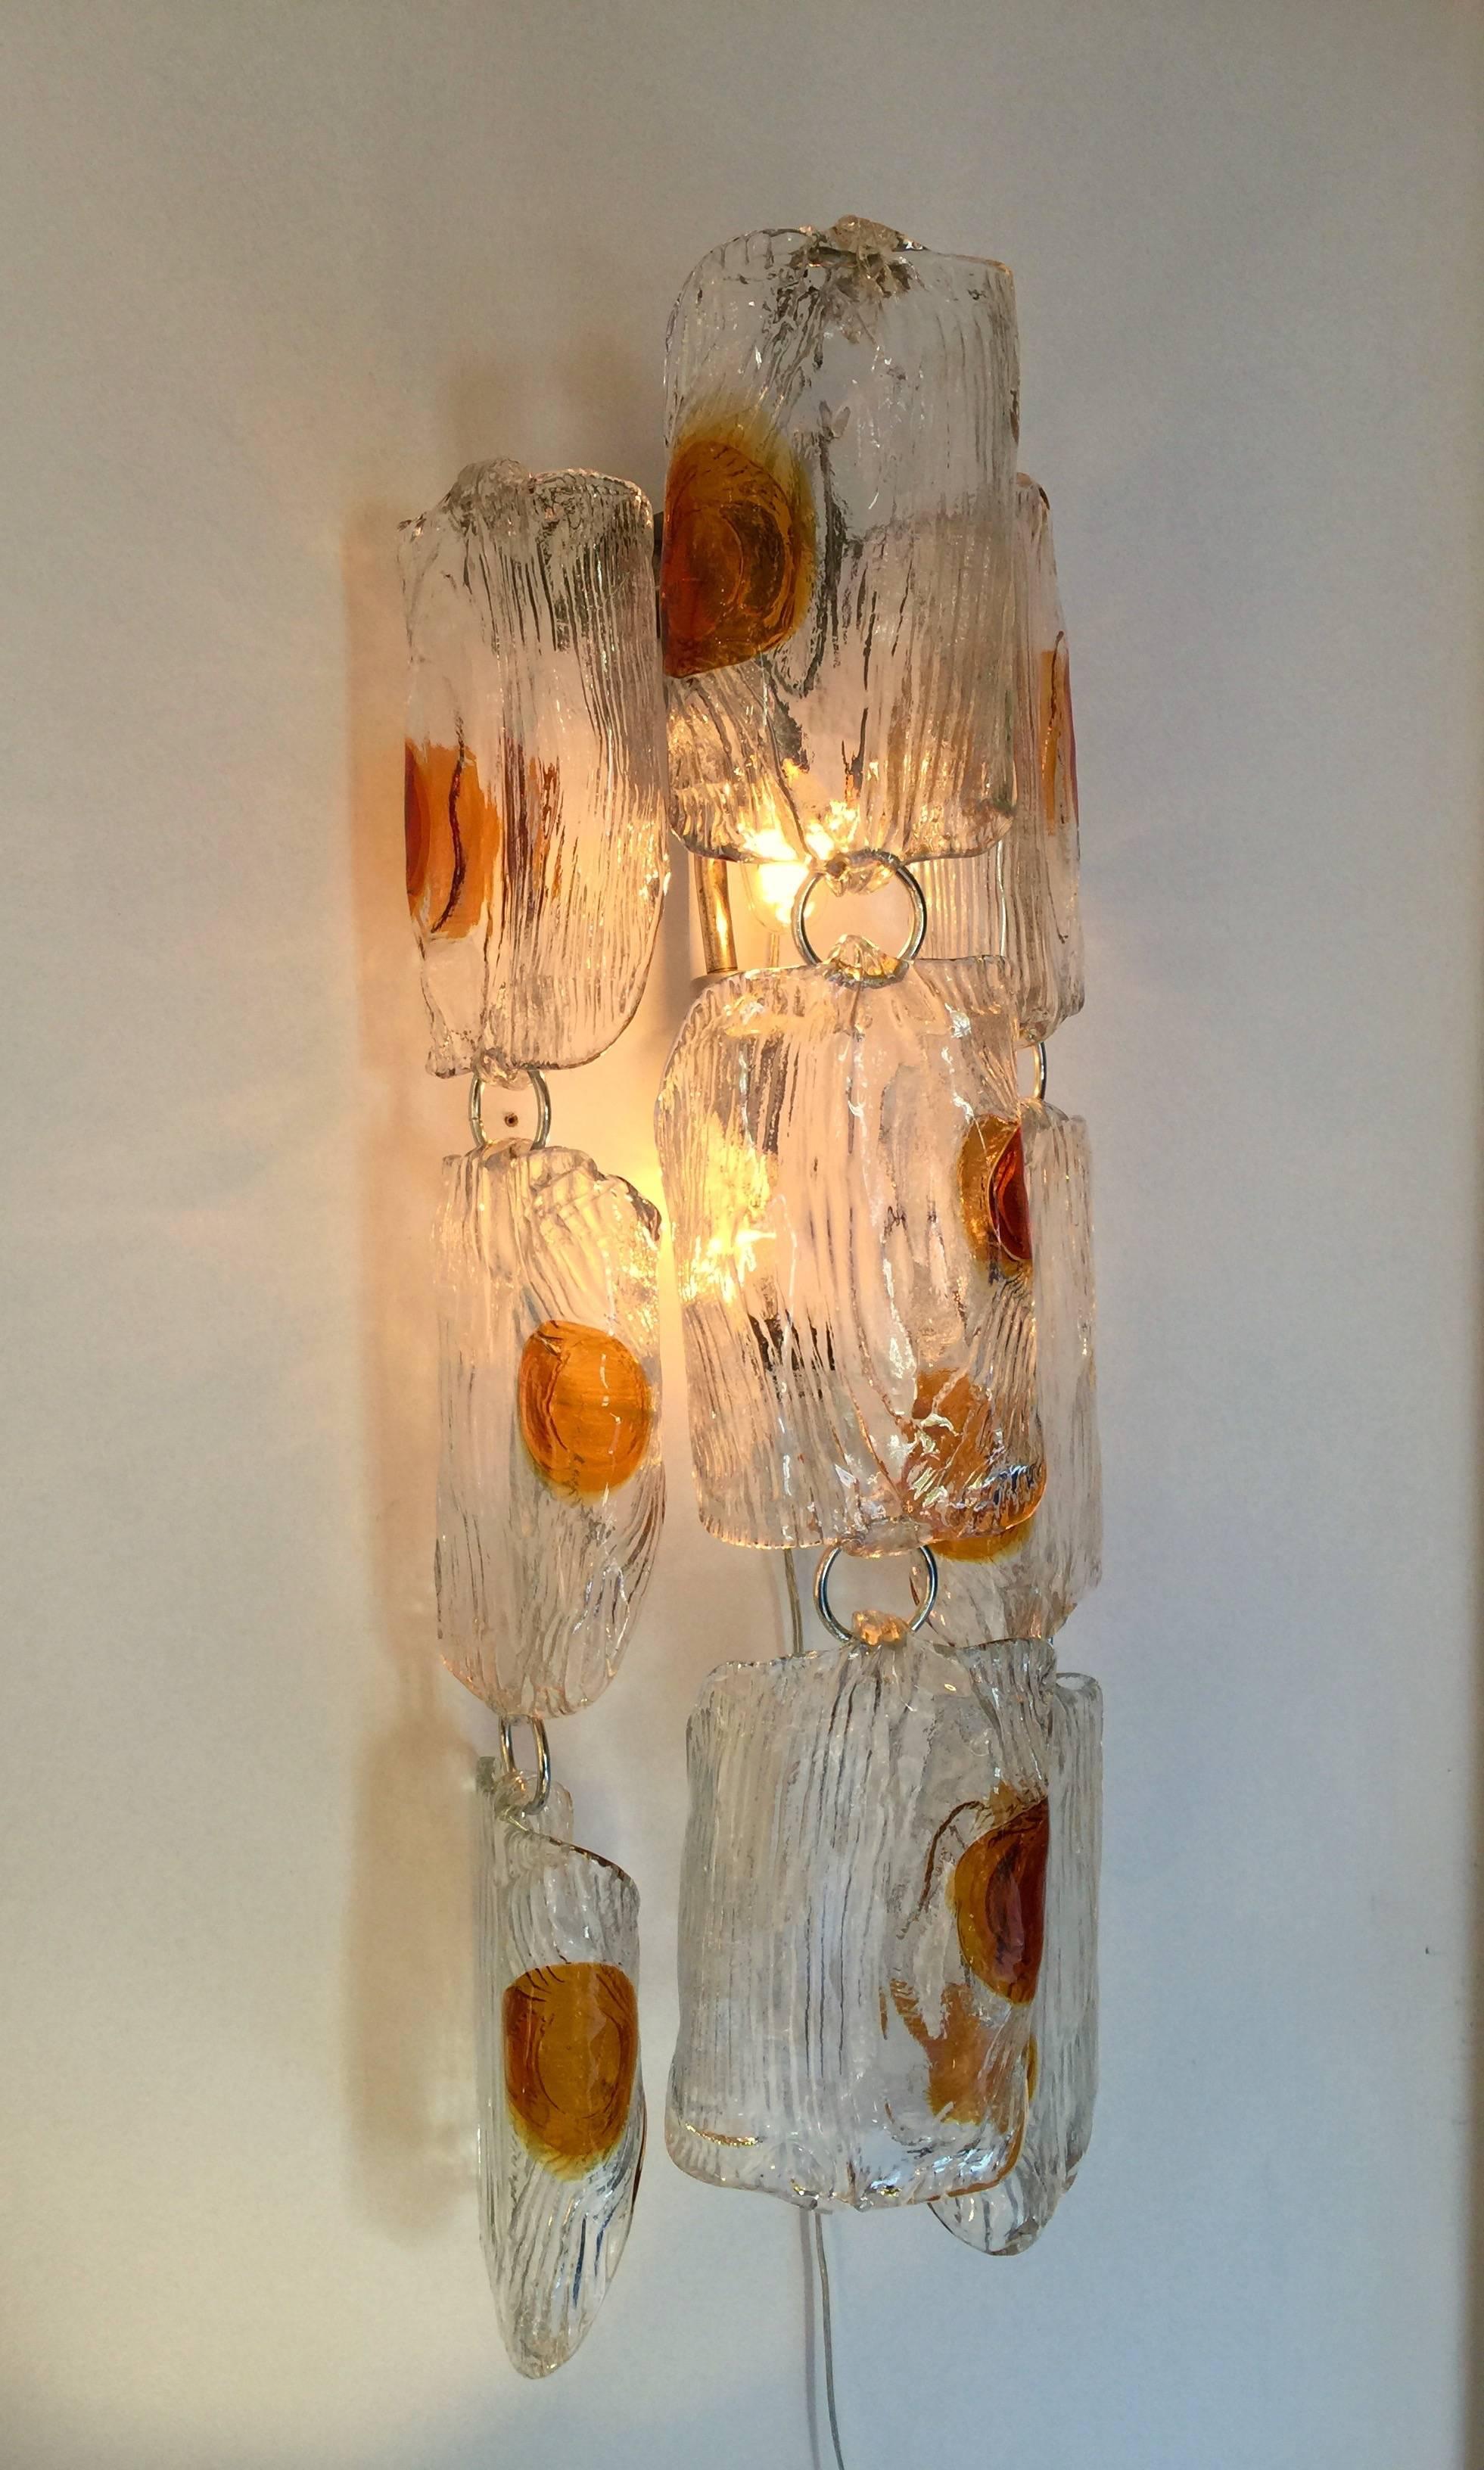 Art Glass Pair of Sconces by Toni Zuccheri for Mazzega Murano. Italy. 1970s